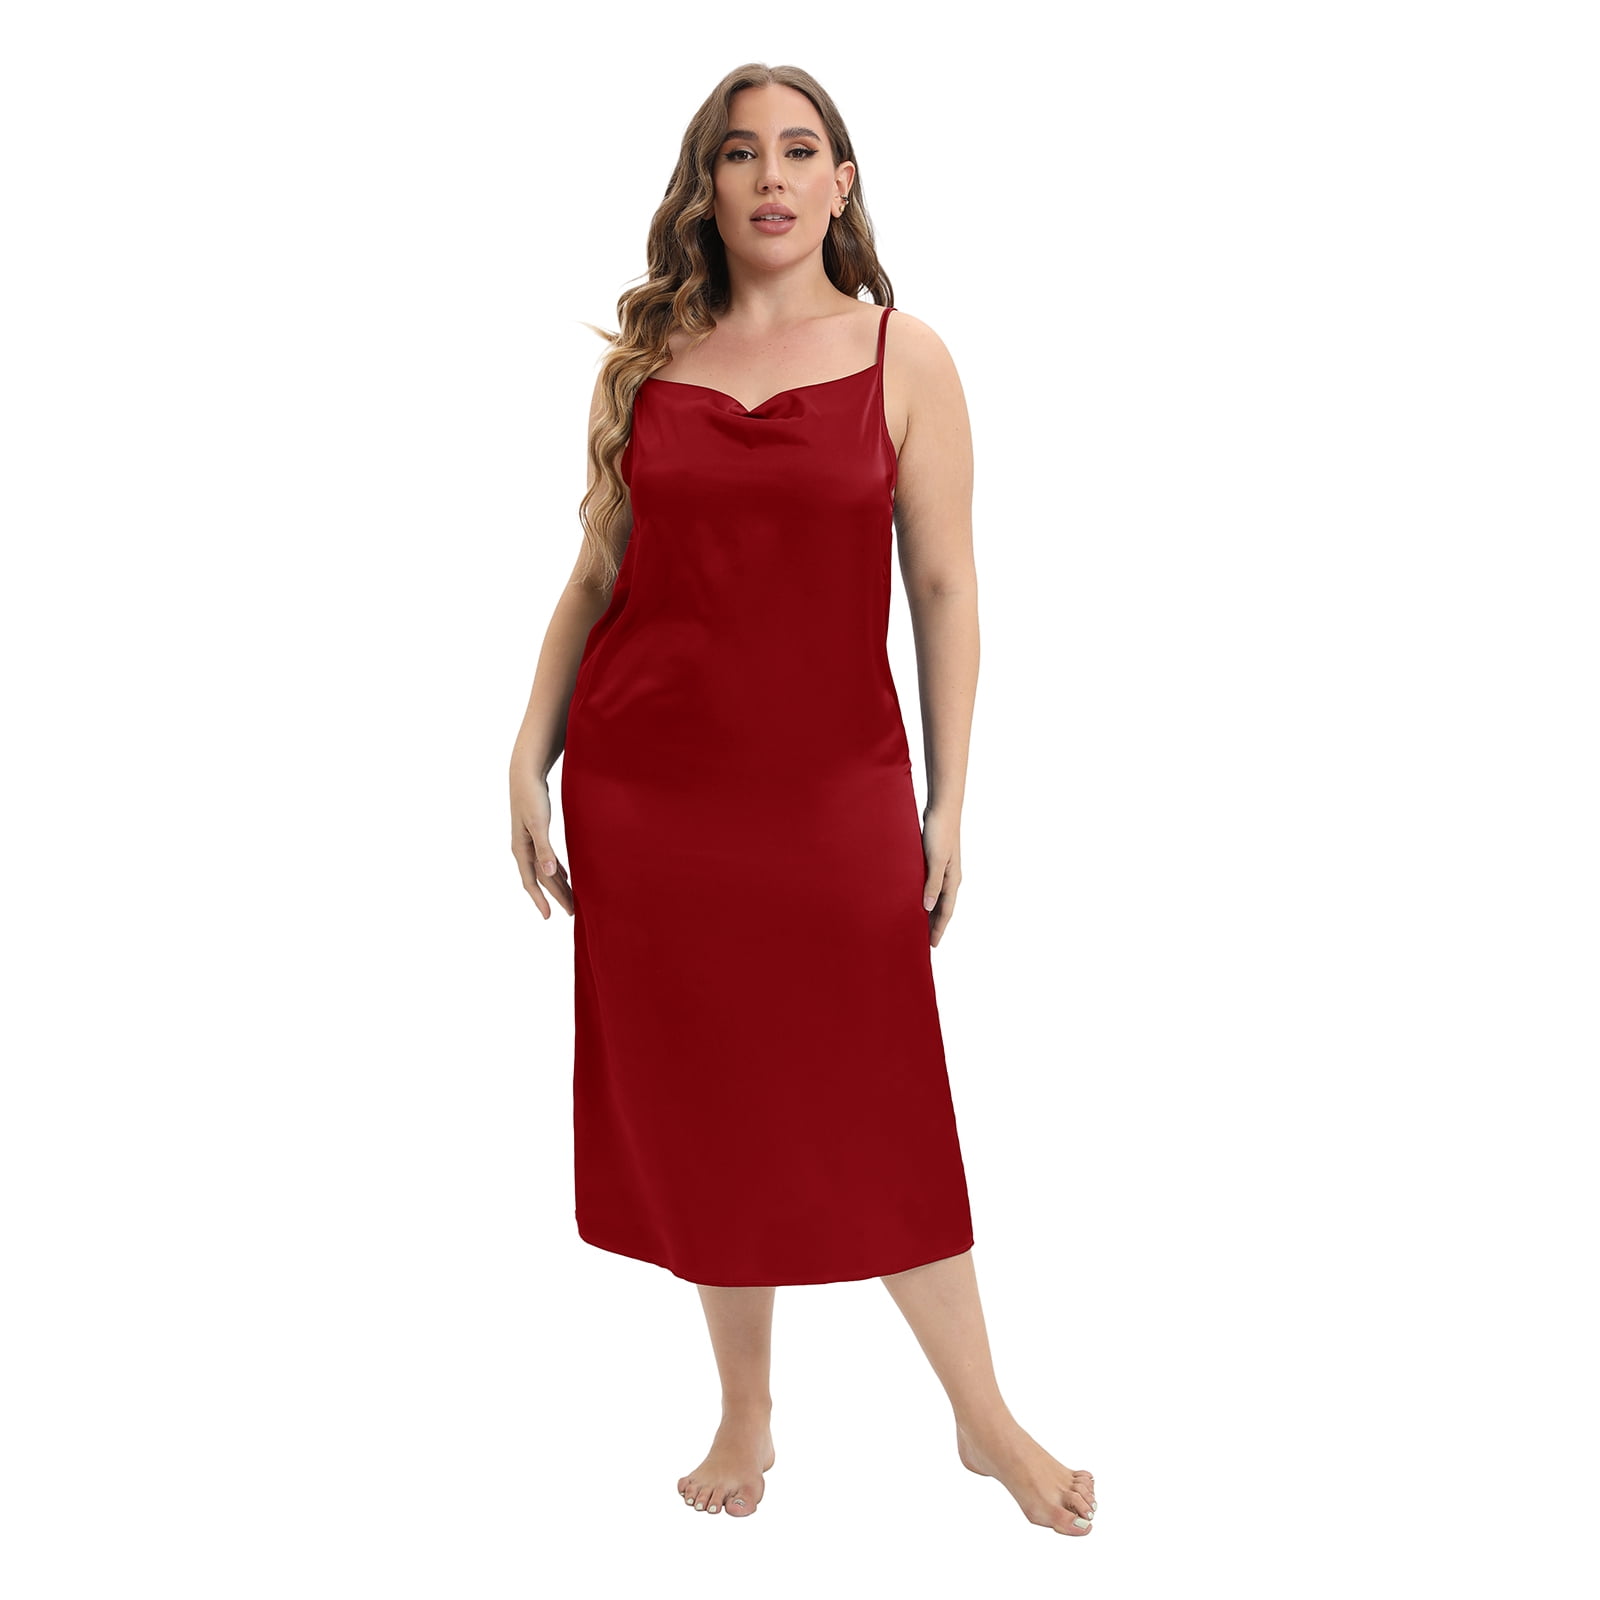 Women's Full Silp Dress with Built in Bra Spaghetti Nightgown Long Cami 